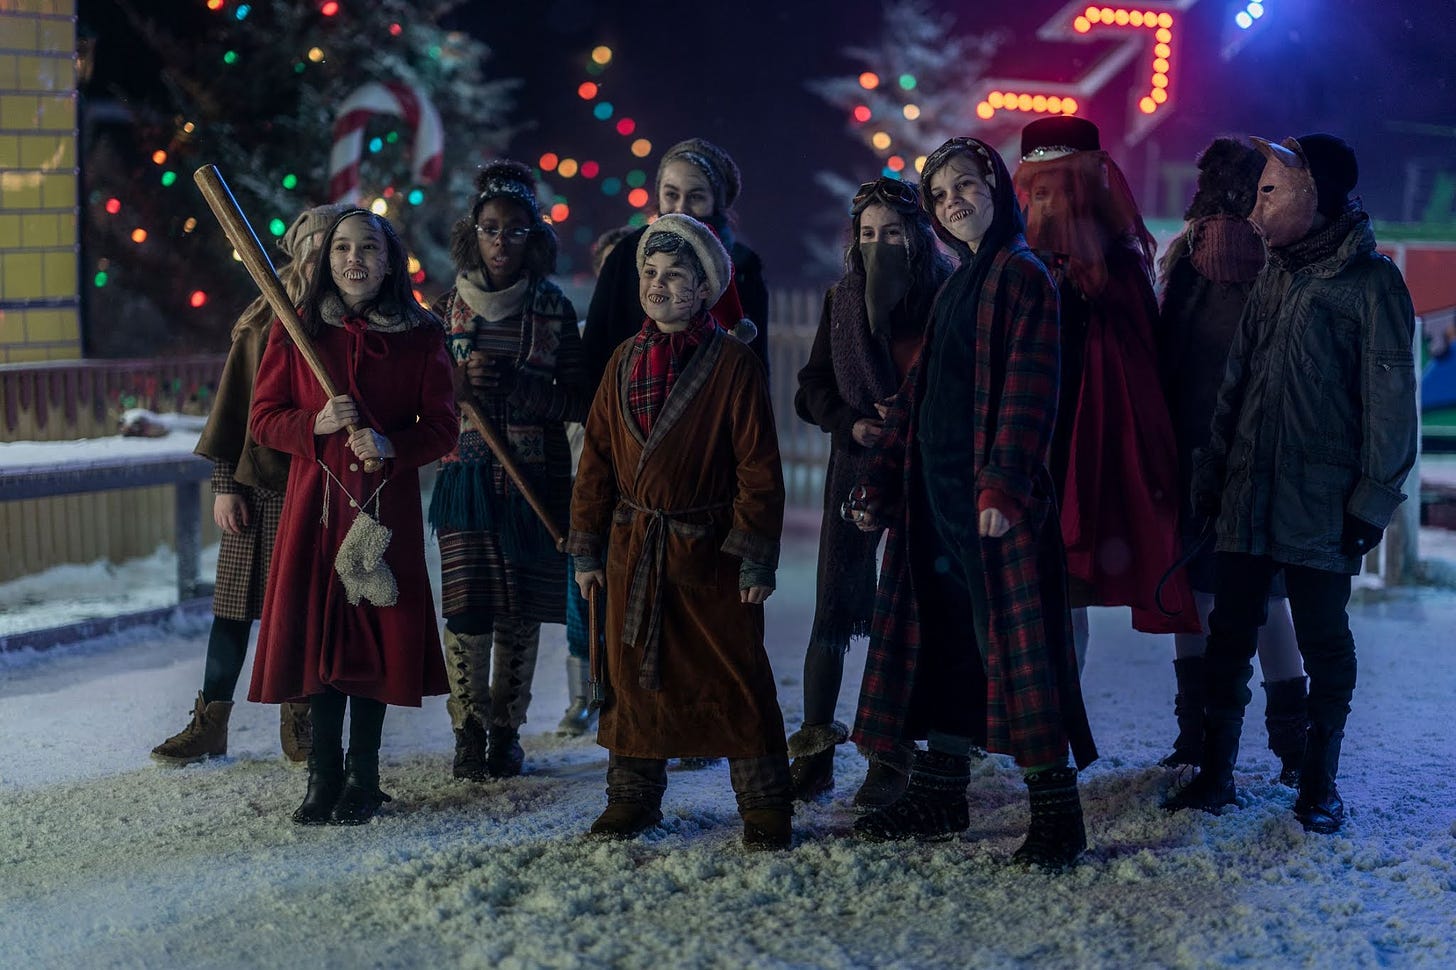 The monstruous children in Christmasland (NOS4A2, 2019-2020).